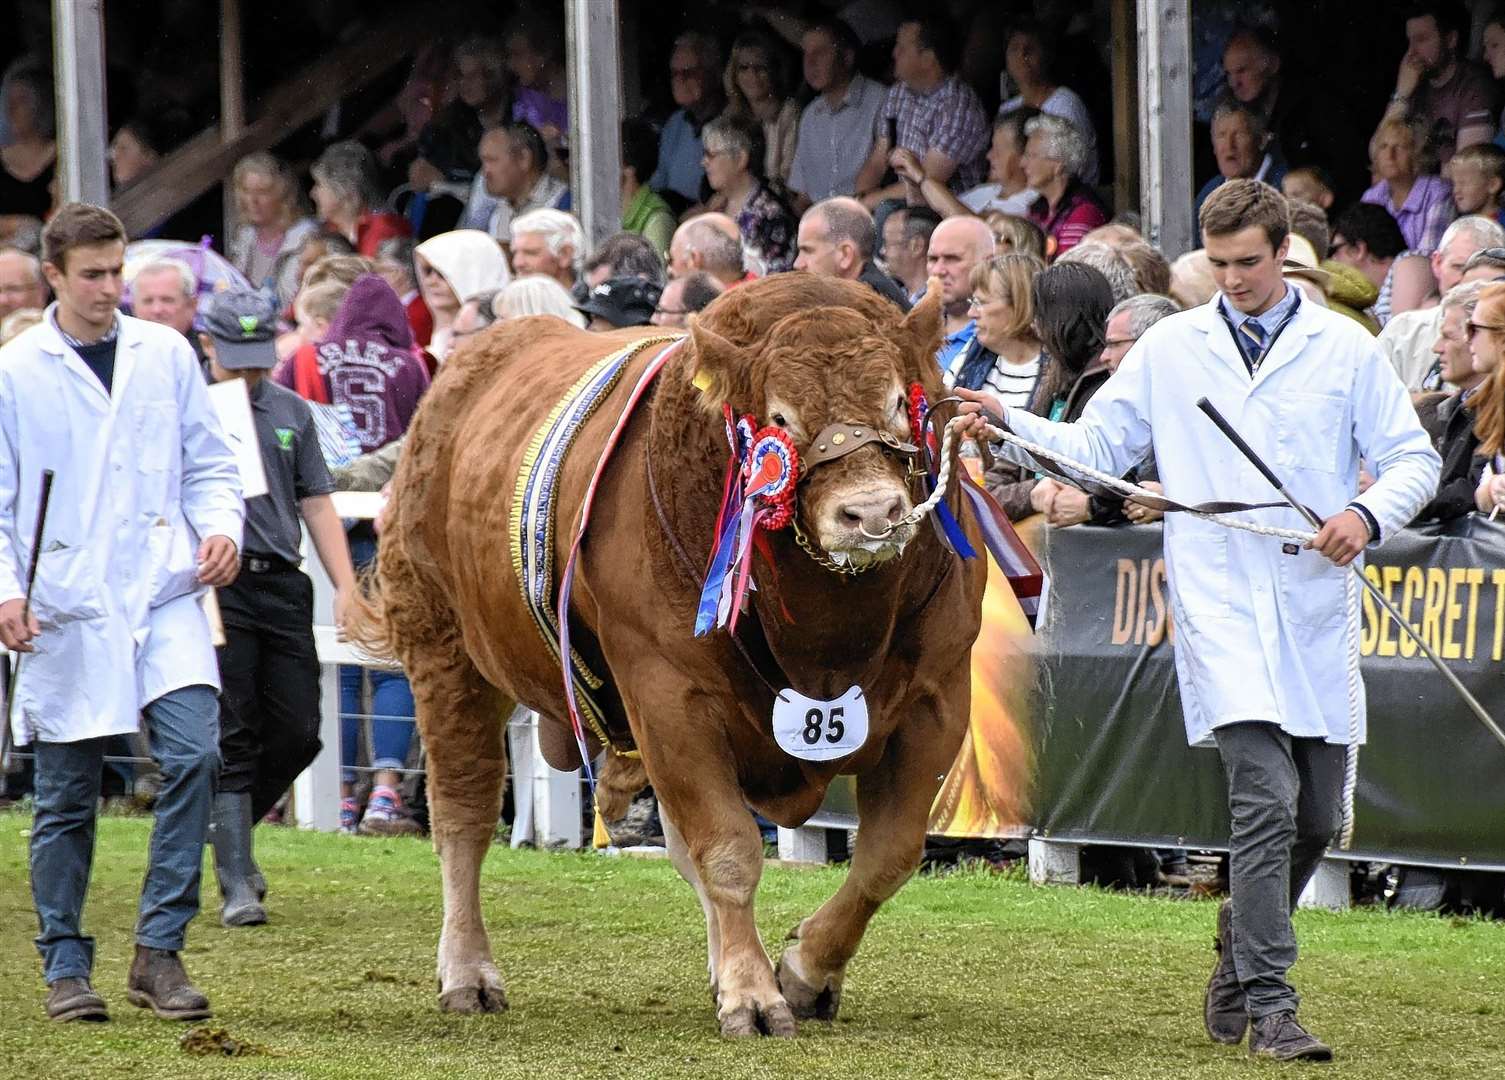 Turriff Show is the largest two-day agricultural show in Scotland.